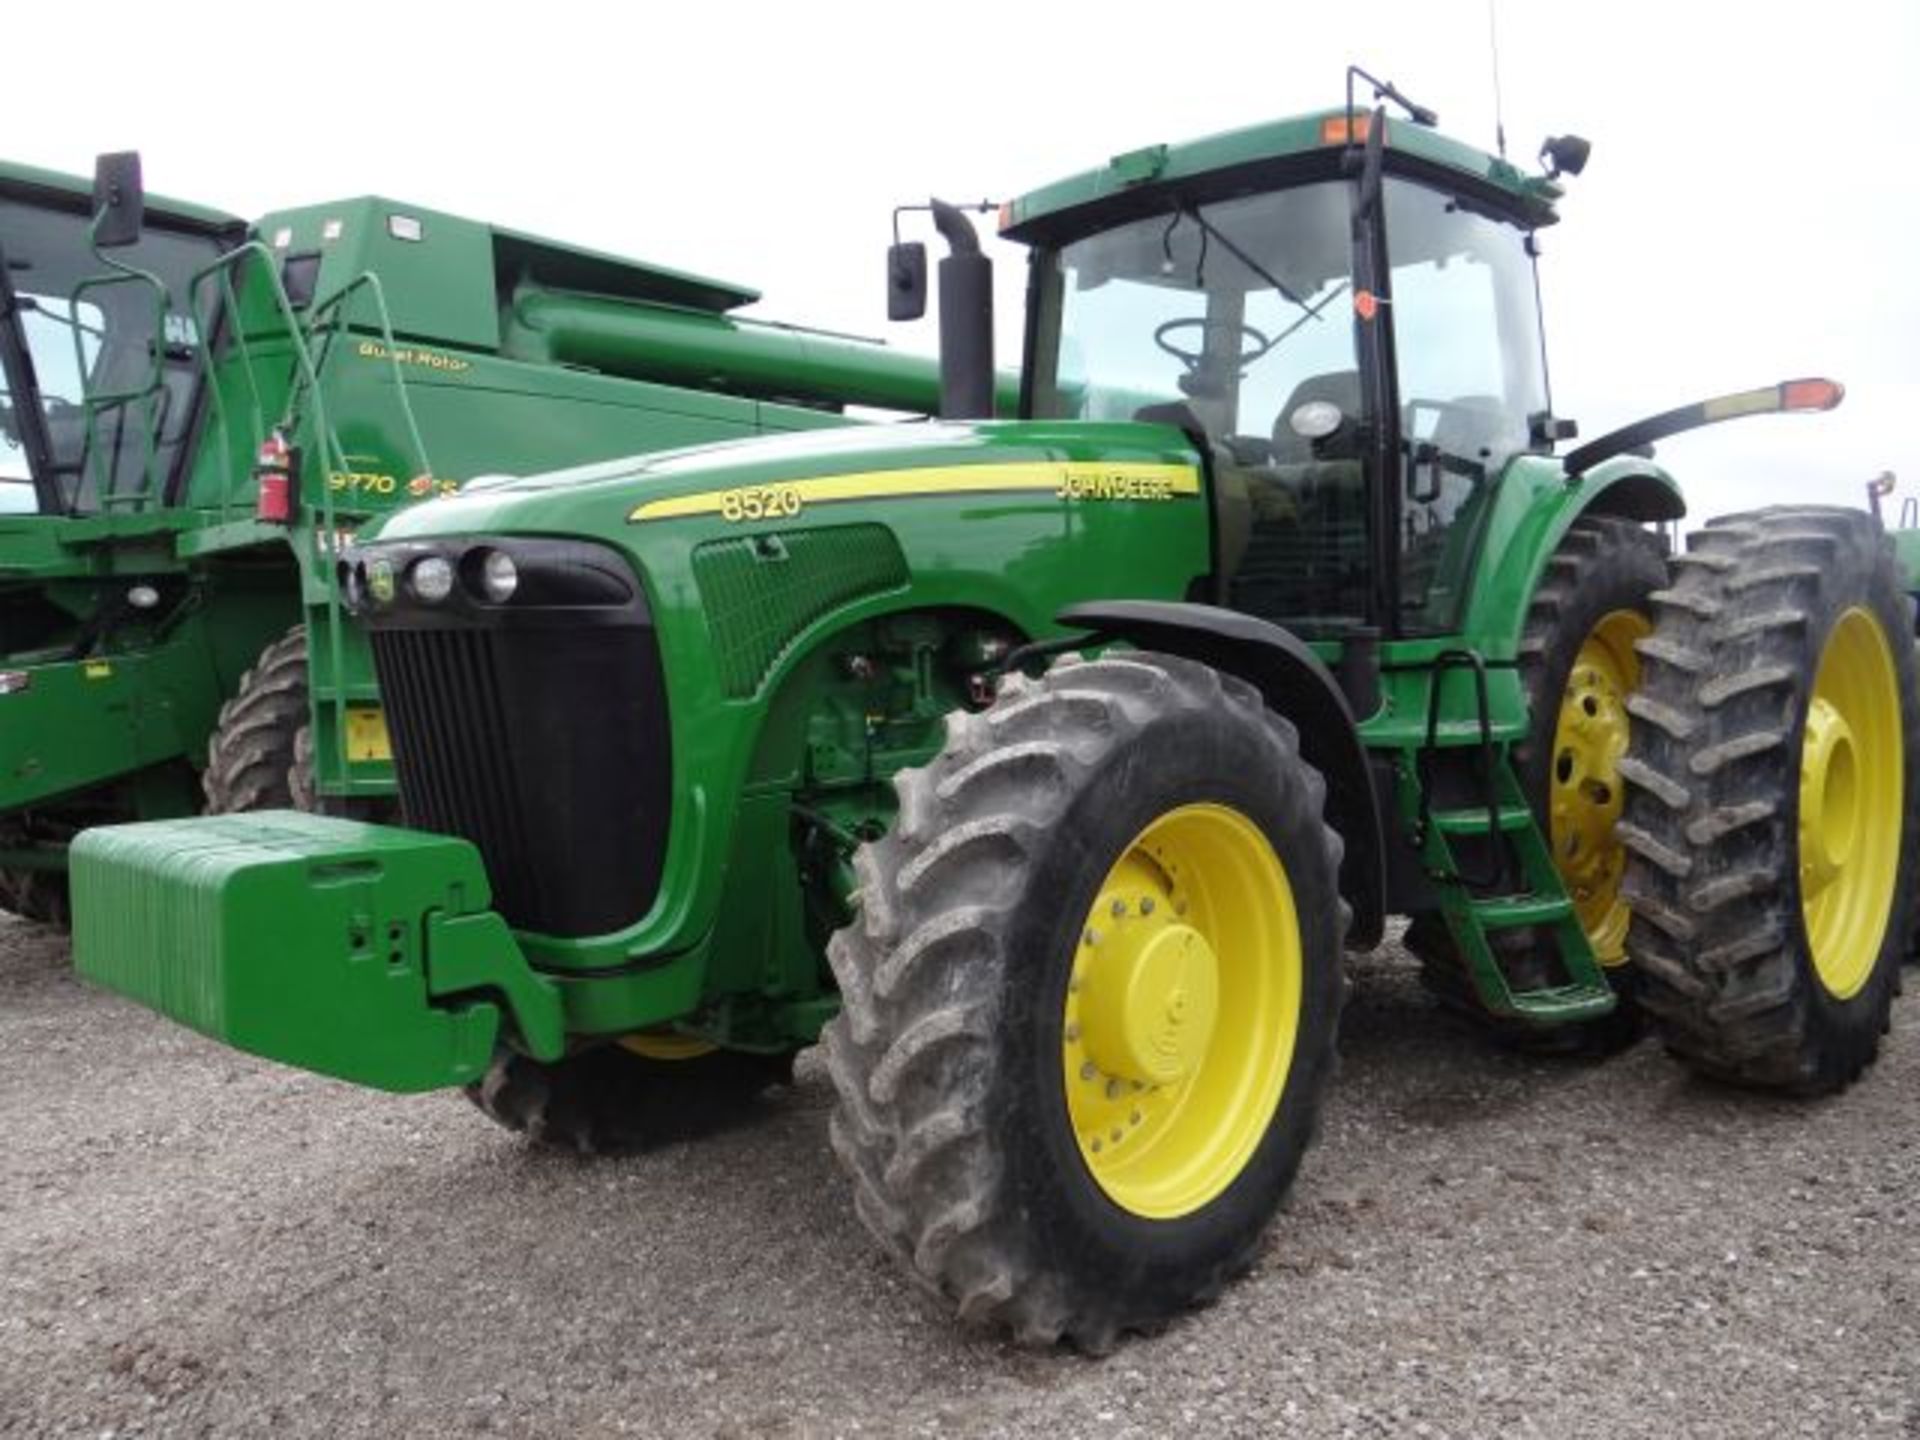 JD8520 Tractor, 2005 Powershift, ILS, 50" Tires, Wt Kit, 4410 hrs - Image 5 of 6